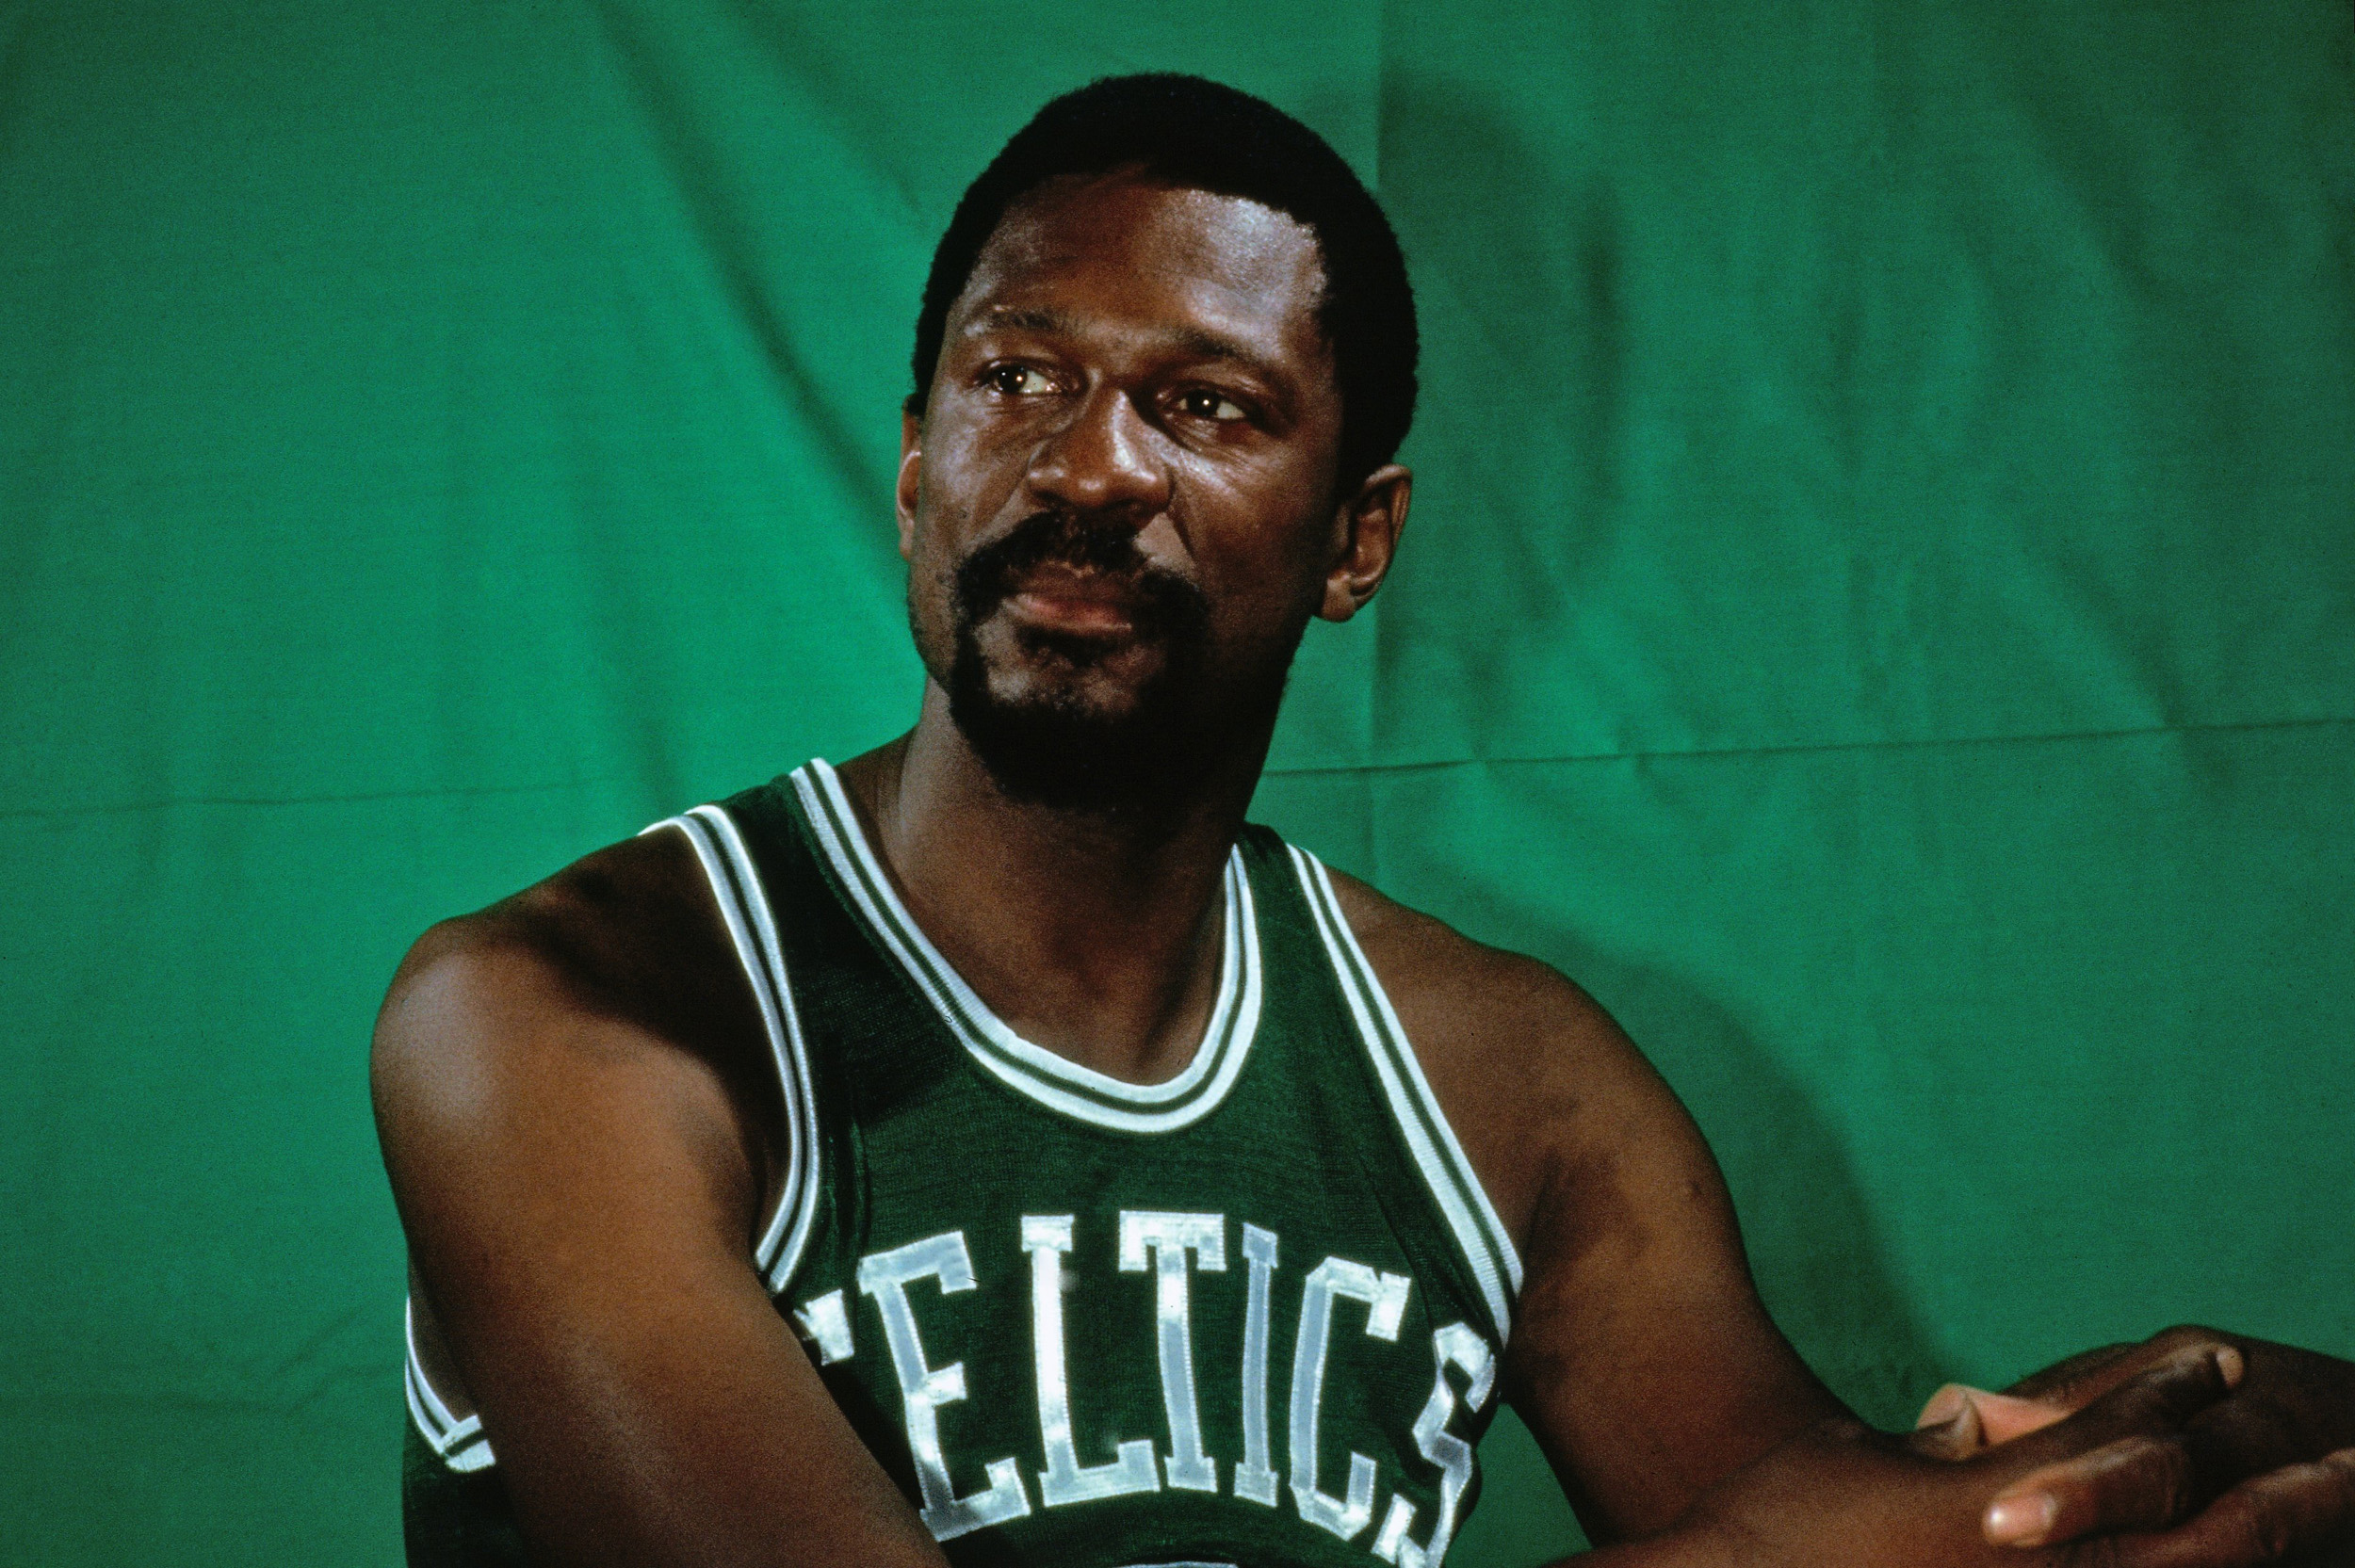 Bill Russell, NBA Star And Civil Rights Pioneer, Dies At 88 - Bloomberg